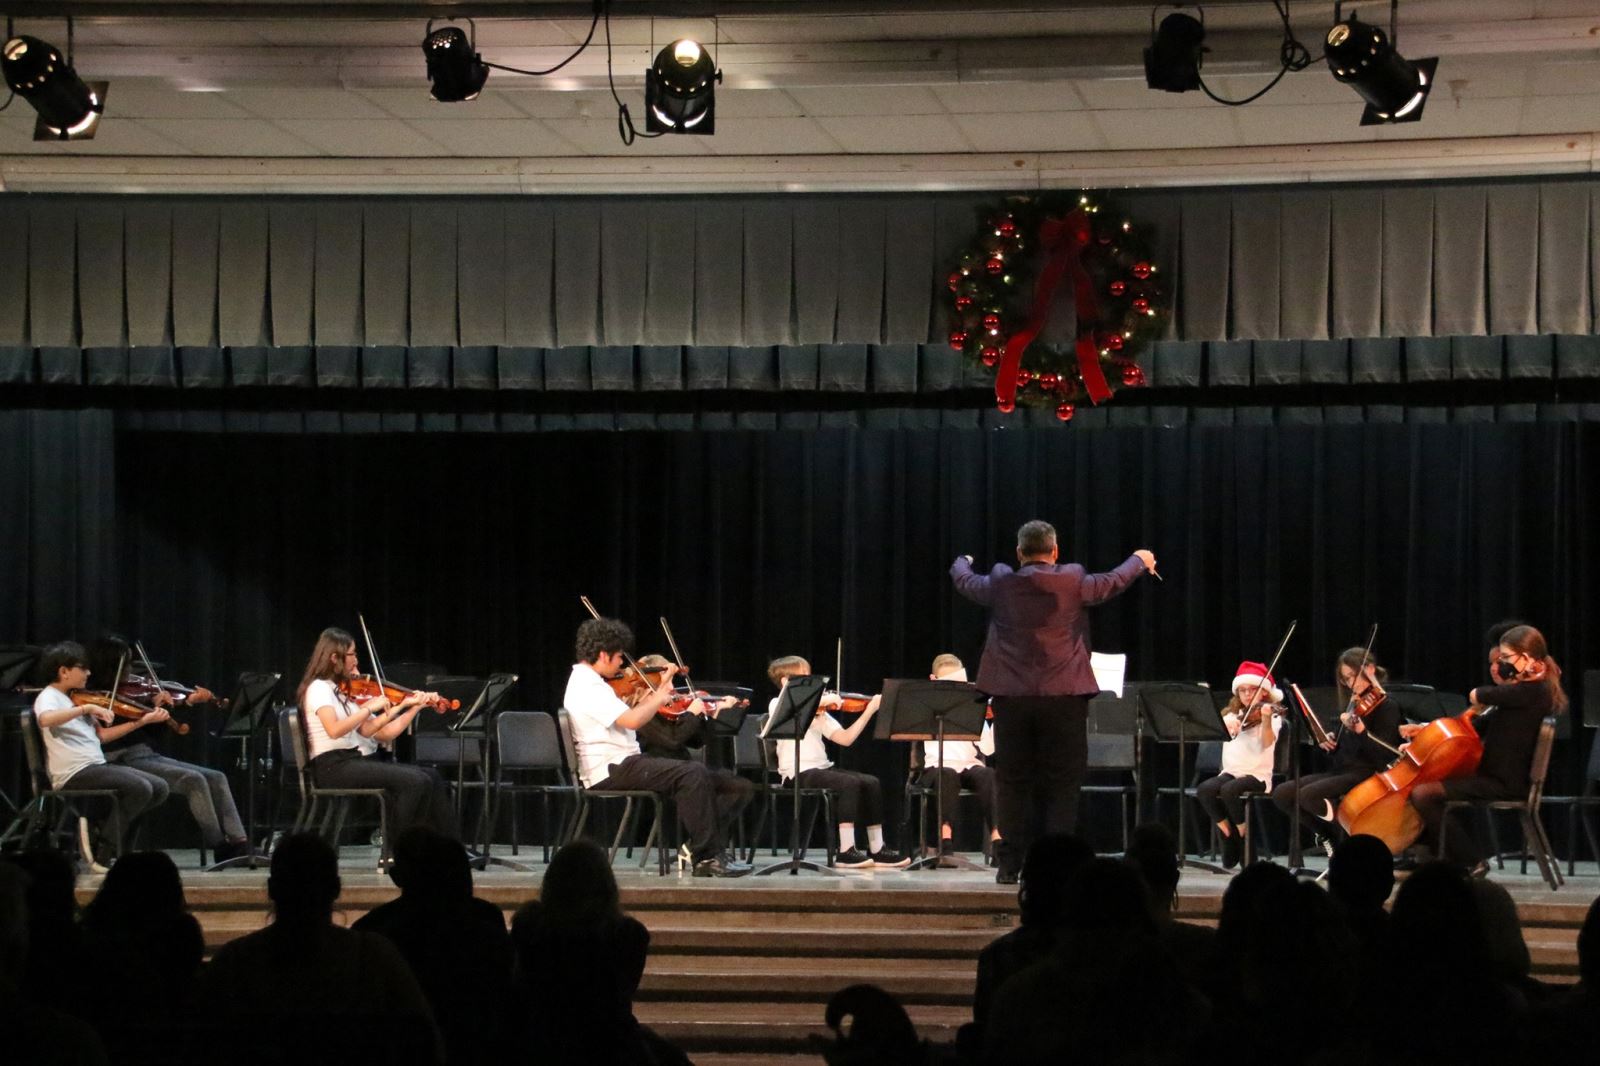 Orchestra Students hosding their Instuments